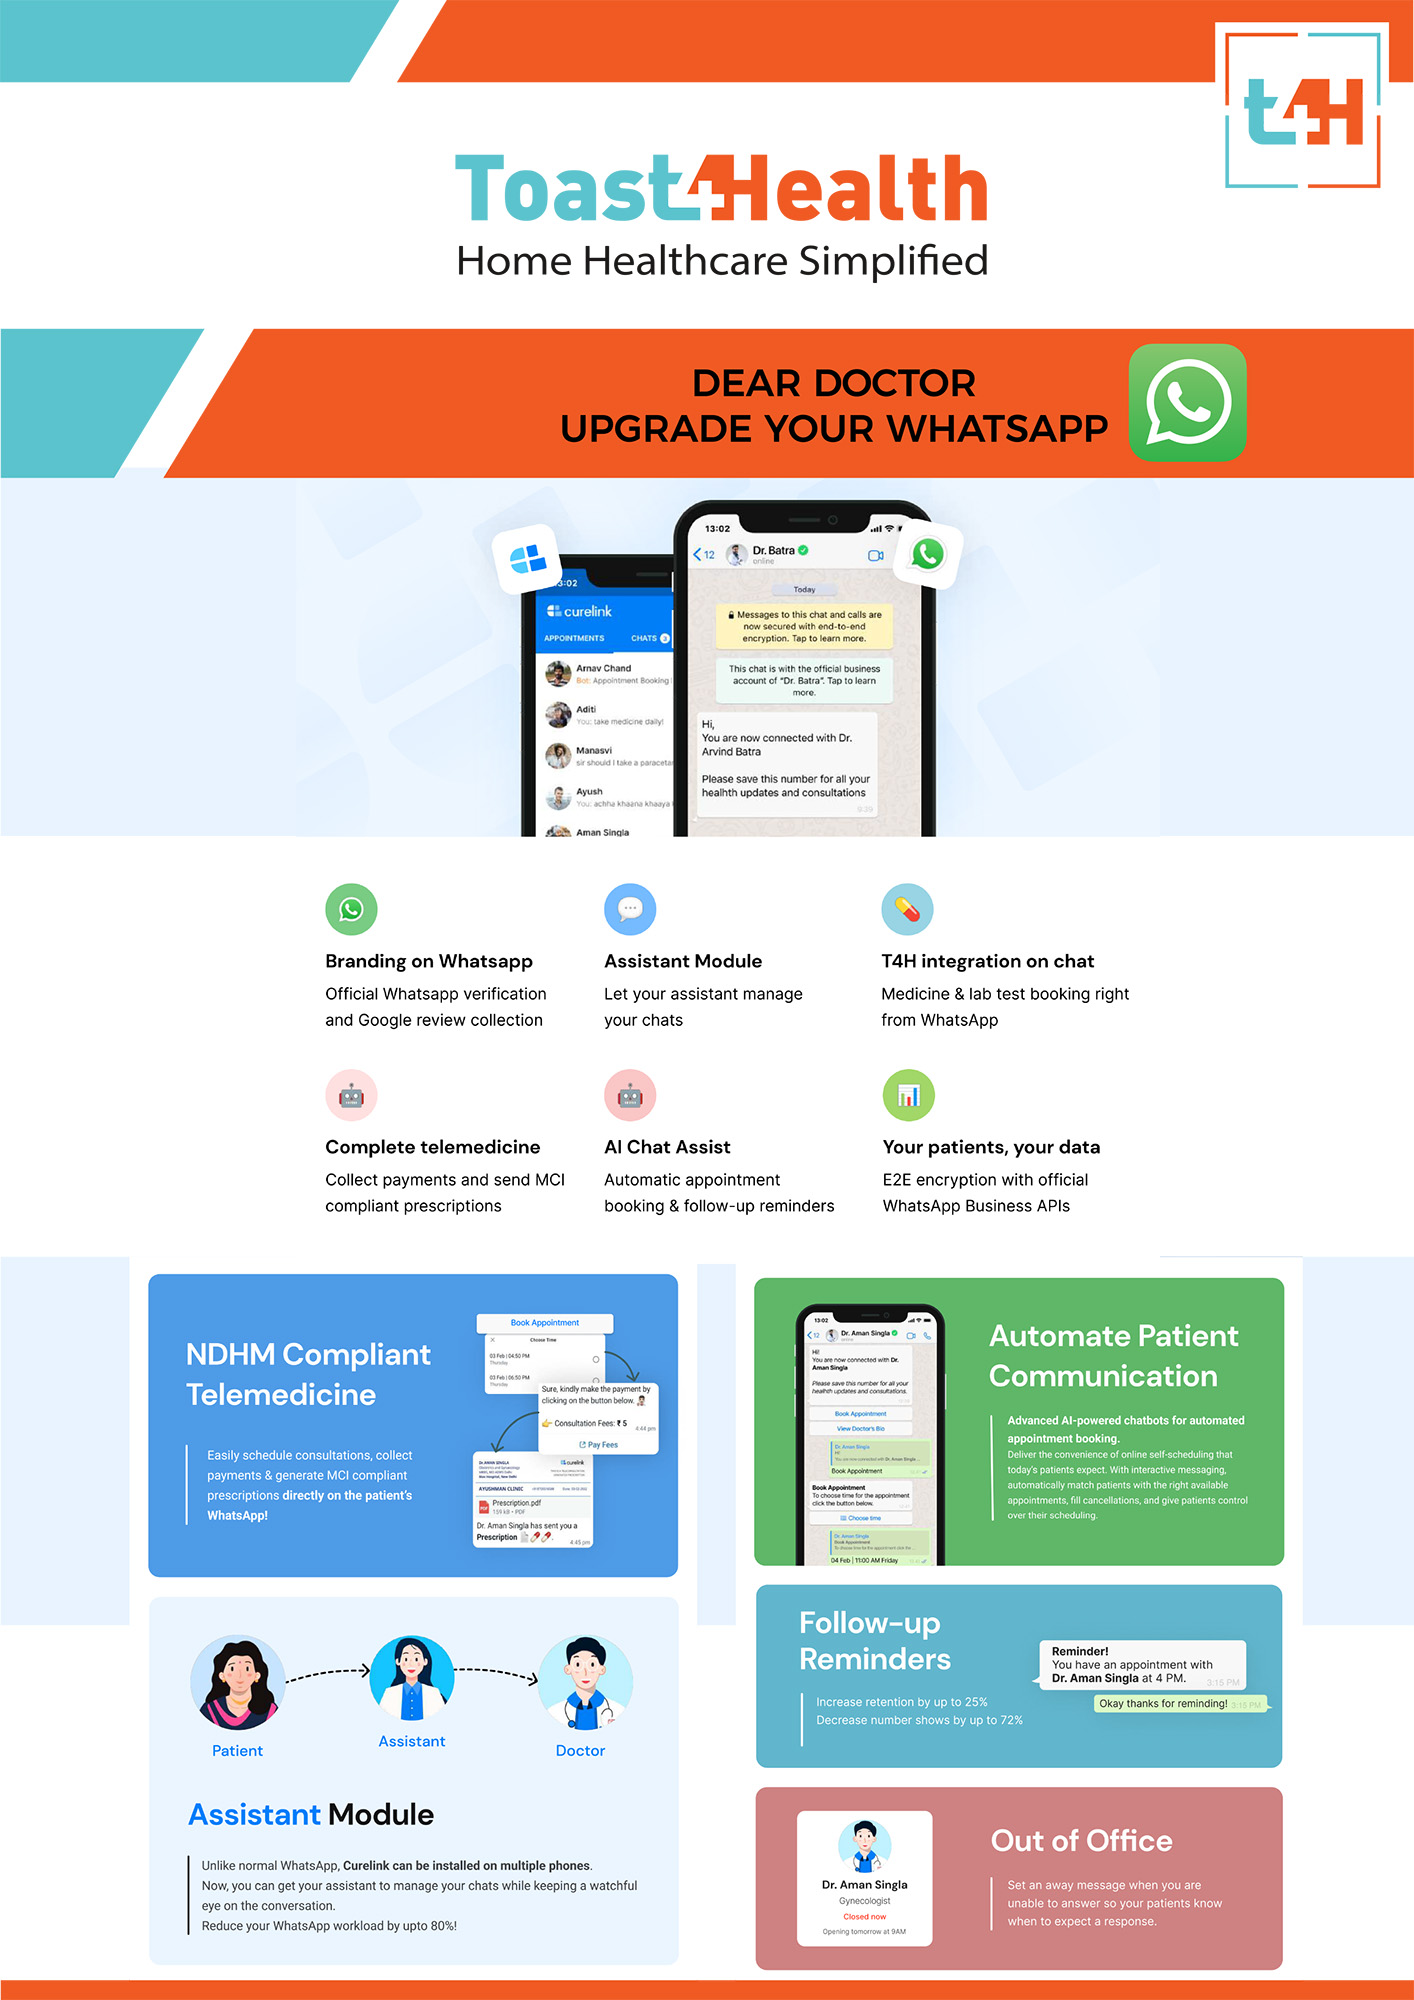 Dear Doctor Upgrade Your Whats App